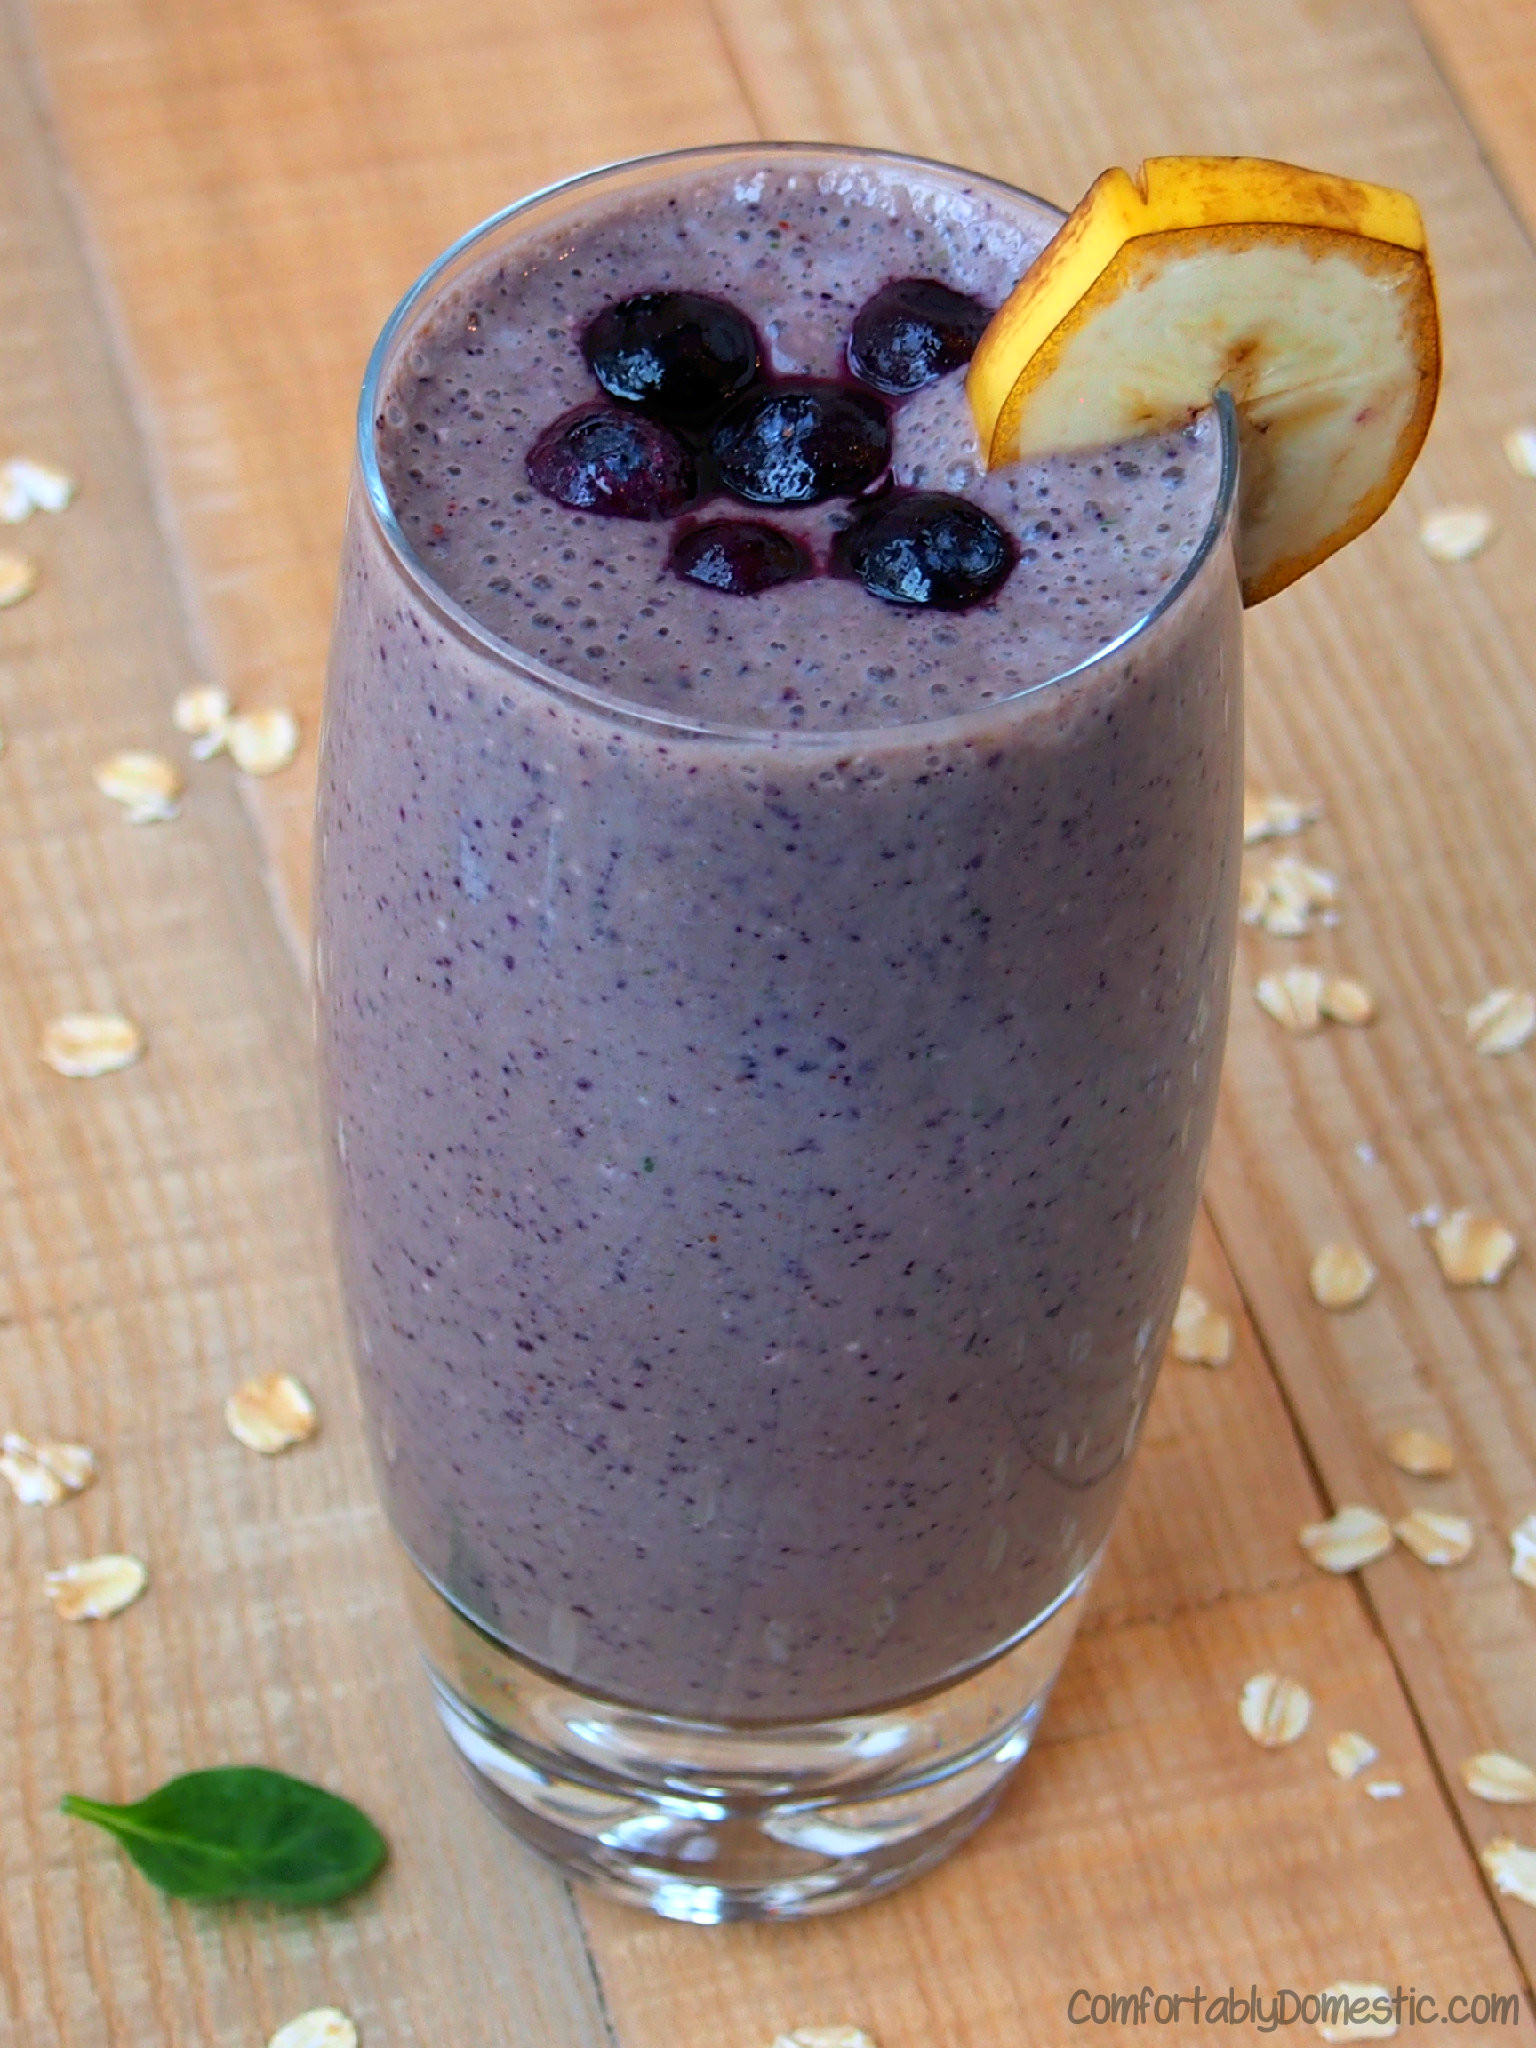 Blueberry Banana Smoothies with (hidden) Spinach | ComfortablyDomestic.com